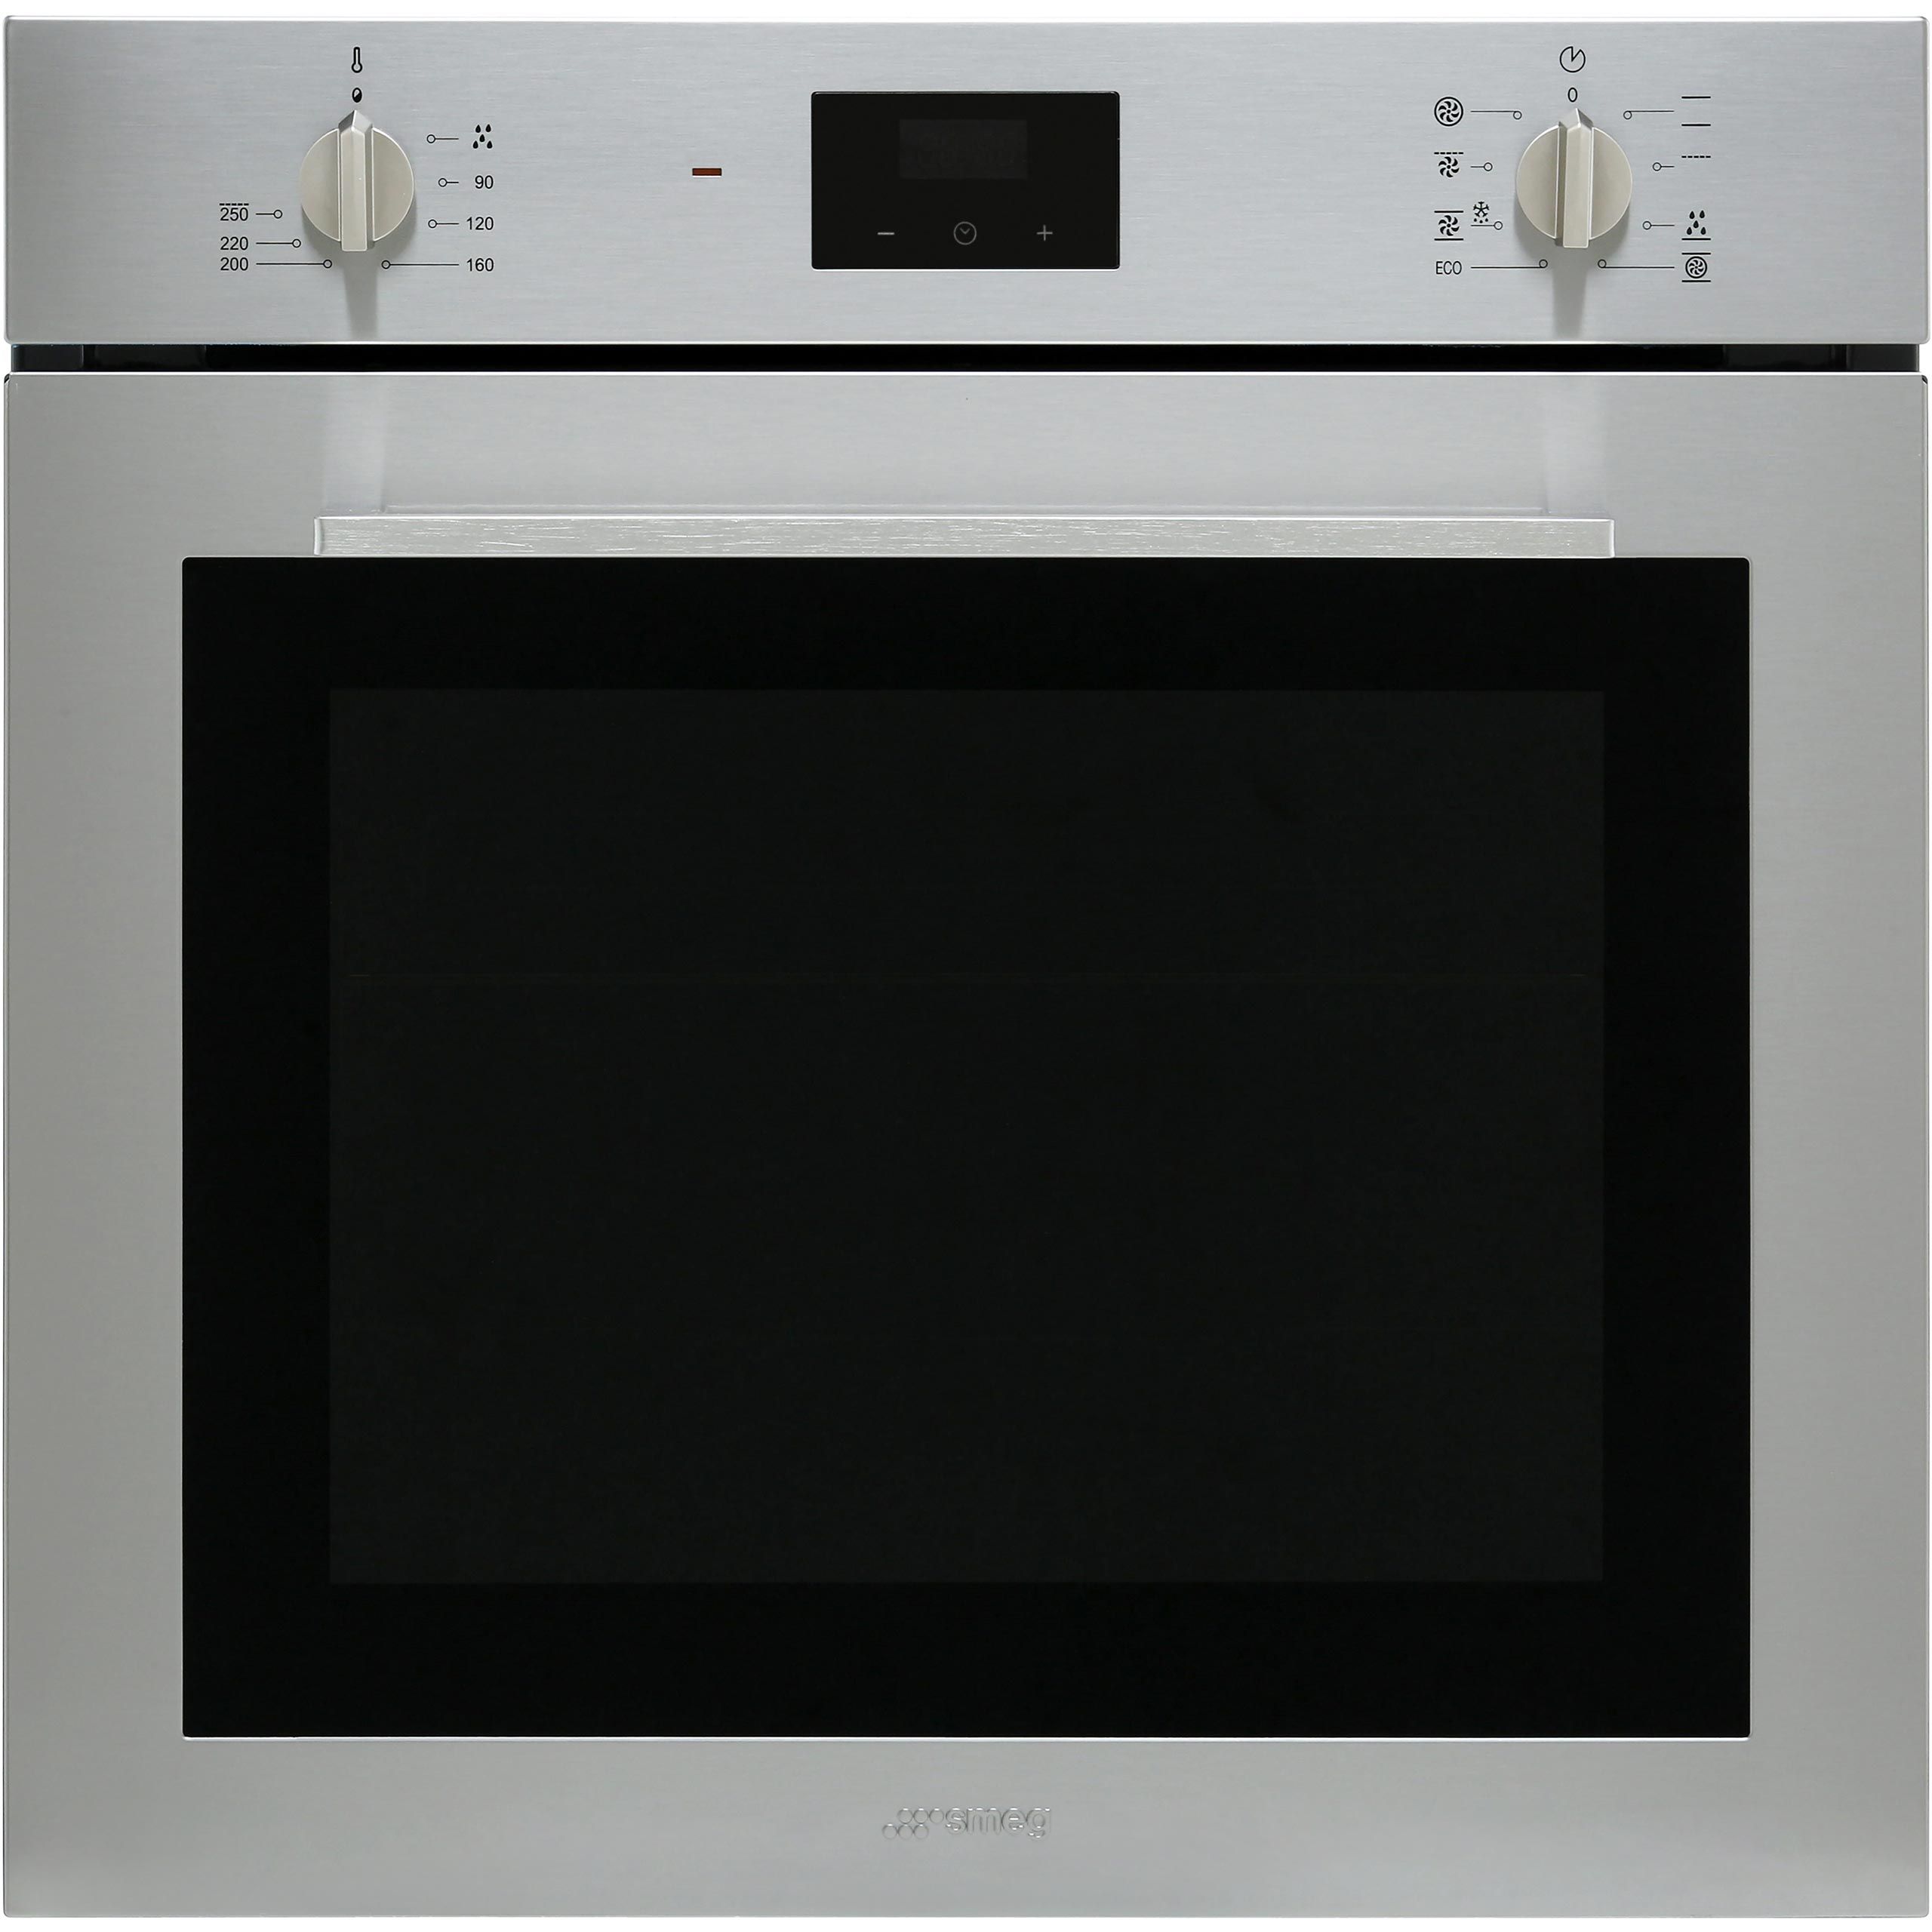 Smeg Cucina SF6400TVX Built In Electric Single Oven - Stainless Steel - A Rated, Stainless Steel